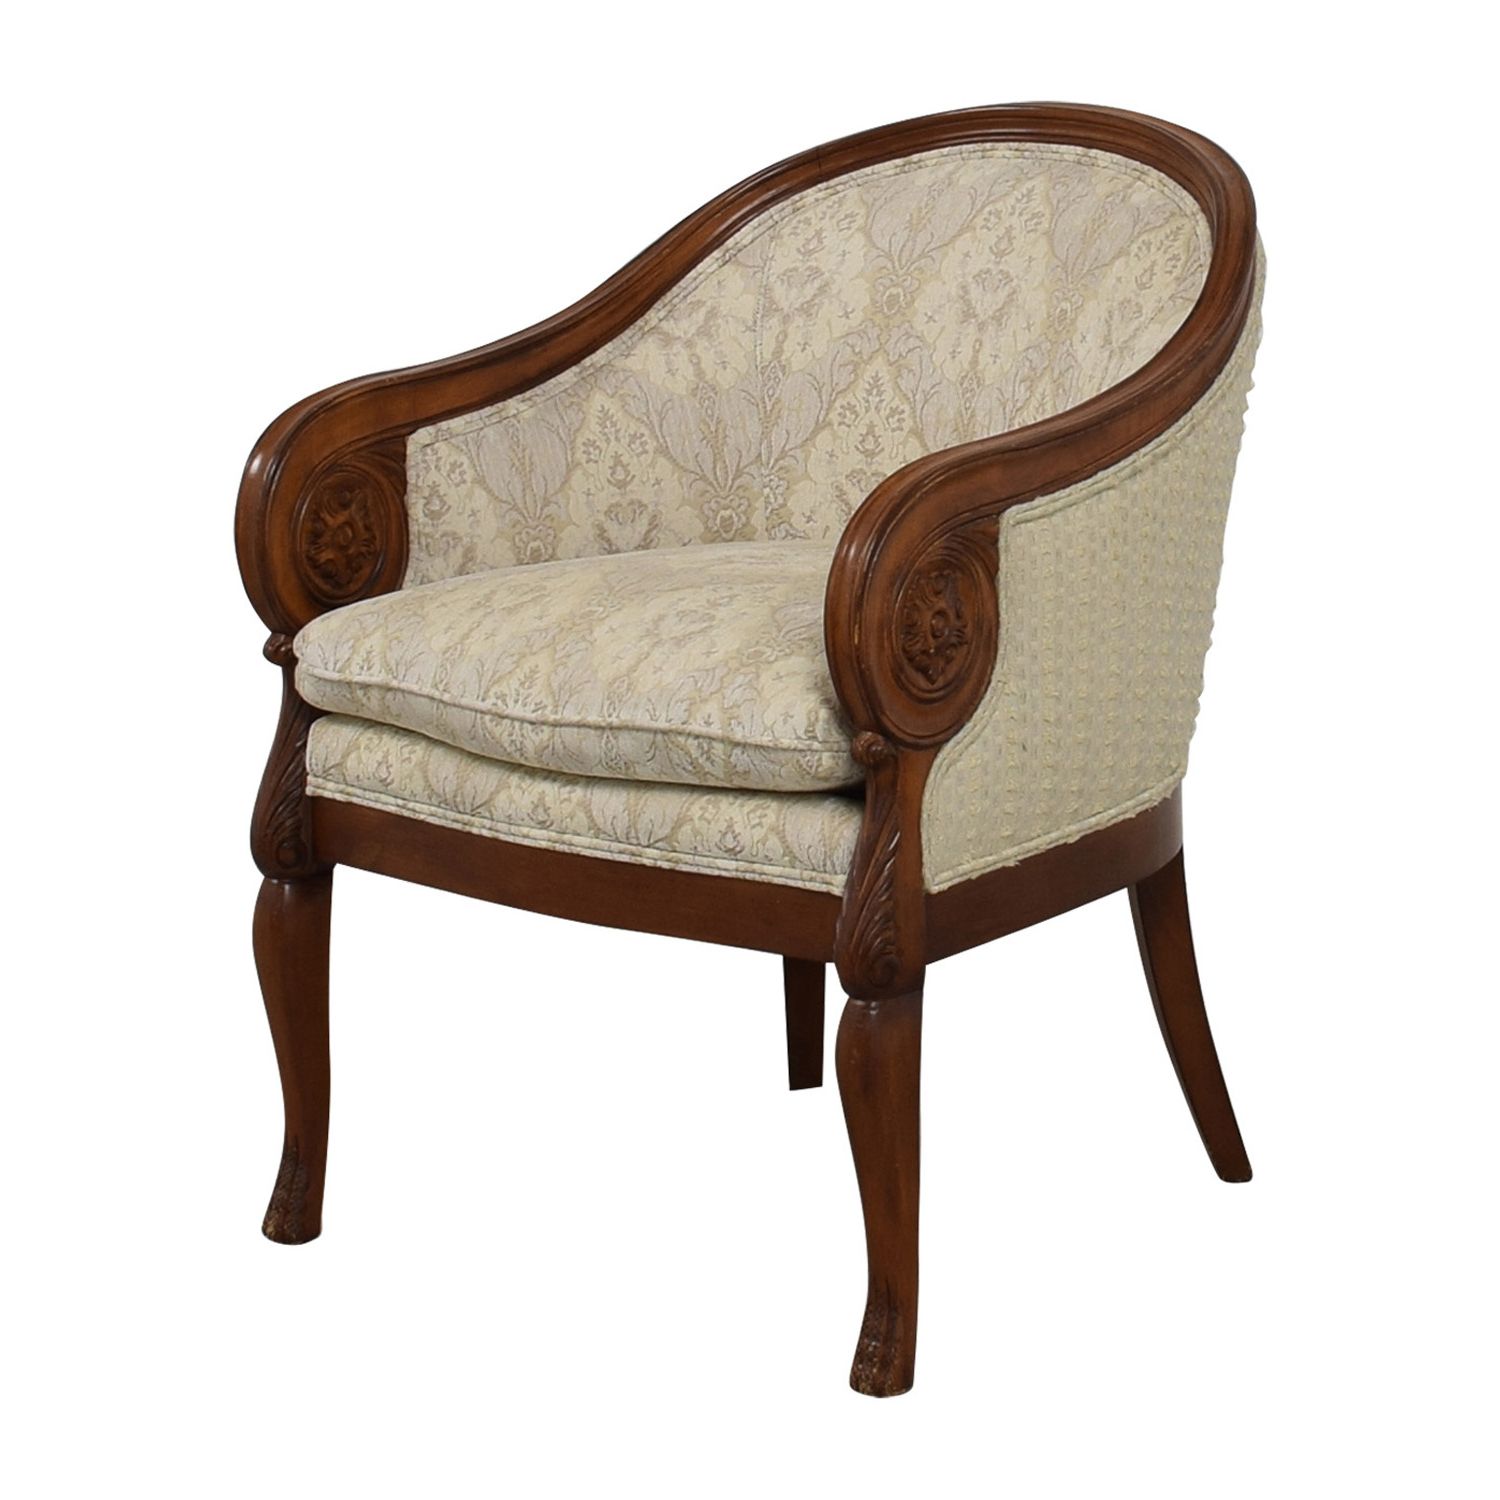 [%90% Off – Custom Beige Upholstered Semi Round Accent Chair / Chairs For Trendy Light Beige Round Accent Stools|light Beige Round Accent Stools Intended For Newest 90% Off – Custom Beige Upholstered Semi Round Accent Chair / Chairs|popular Light Beige Round Accent Stools Inside 90% Off – Custom Beige Upholstered Semi Round Accent Chair / Chairs|trendy 90% Off – Custom Beige Upholstered Semi Round Accent Chair / Chairs With Regard To Light Beige Round Accent Stools%] (View 10 of 10)